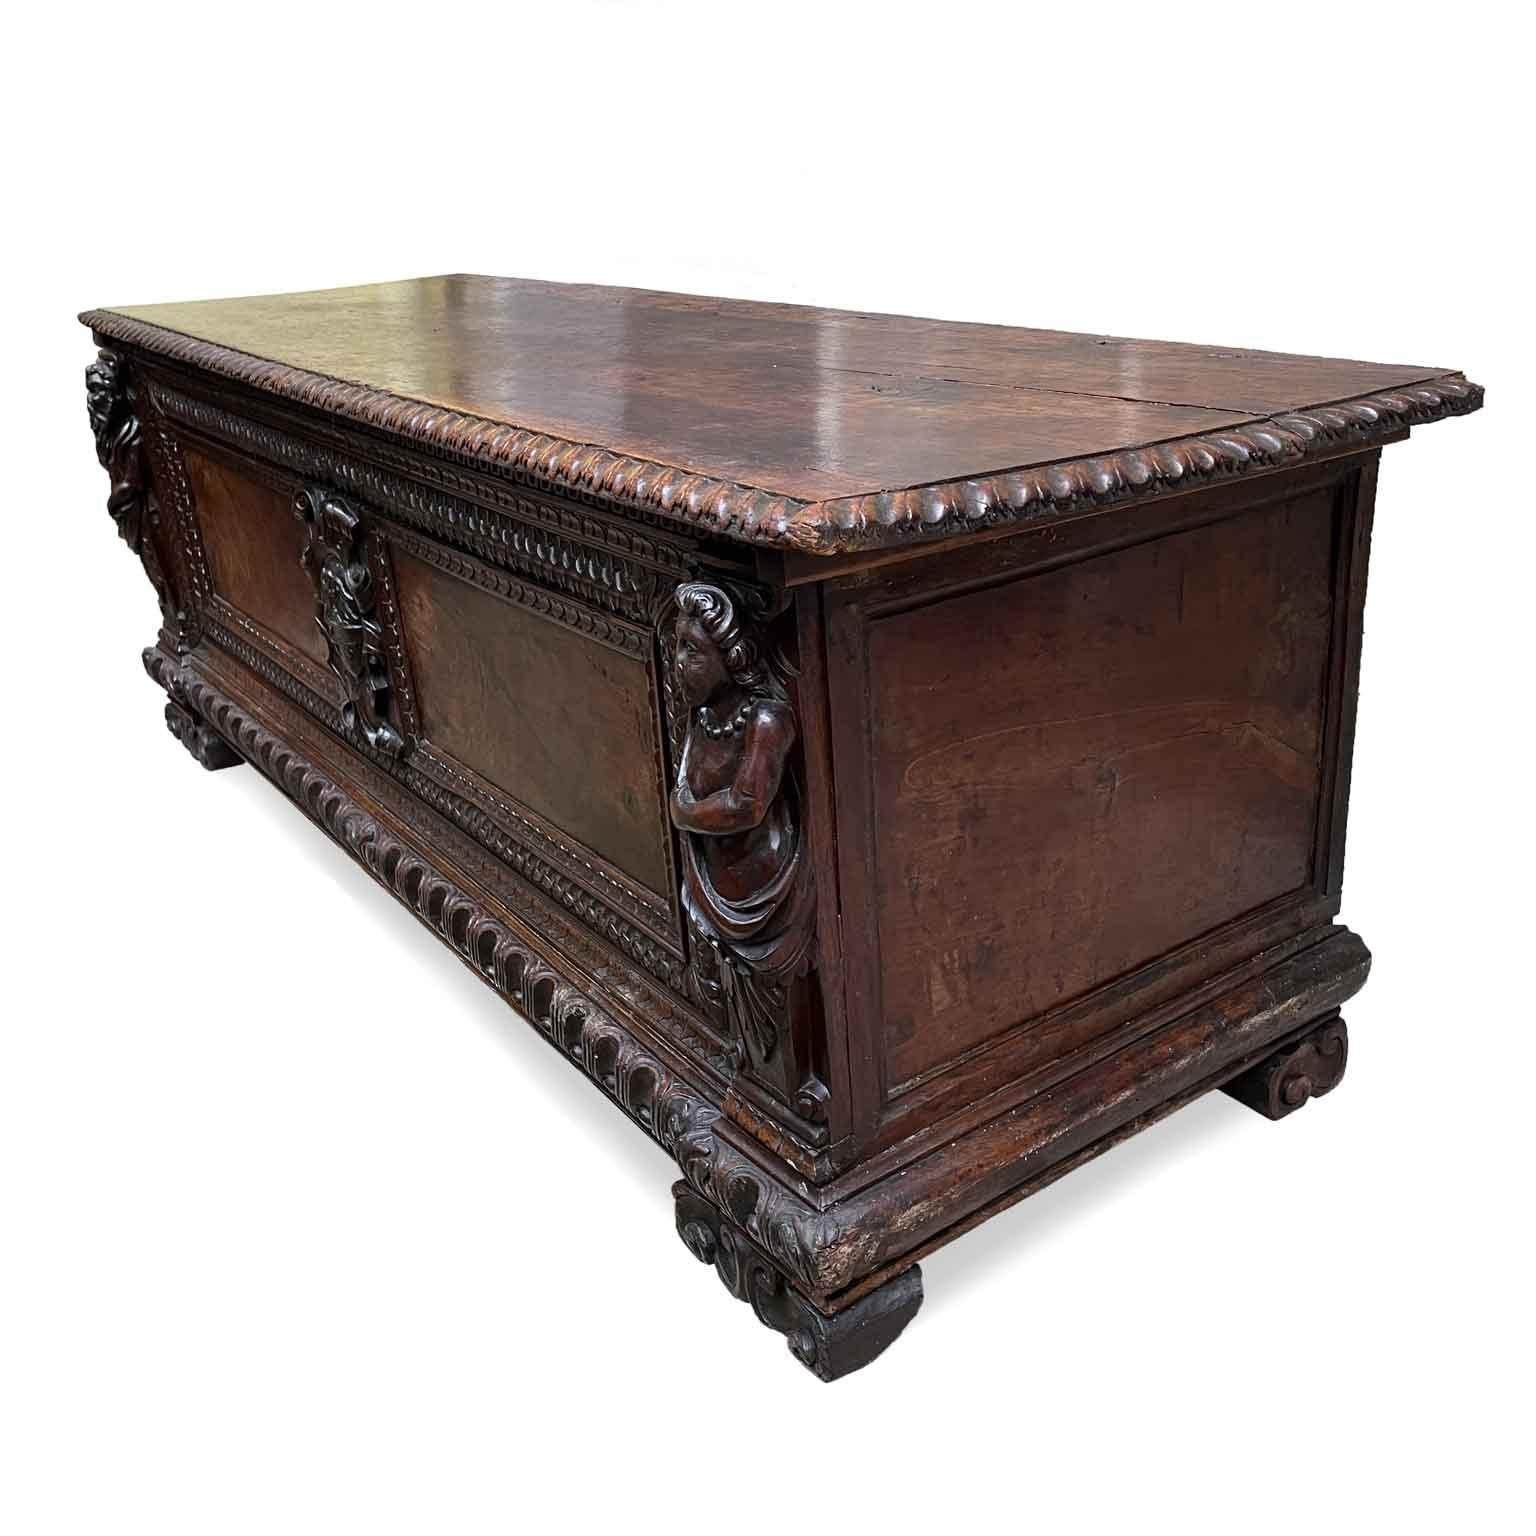 17th Century Italian Walnut Chest Arms and Caryatids Carving Renaissance Trunk 1